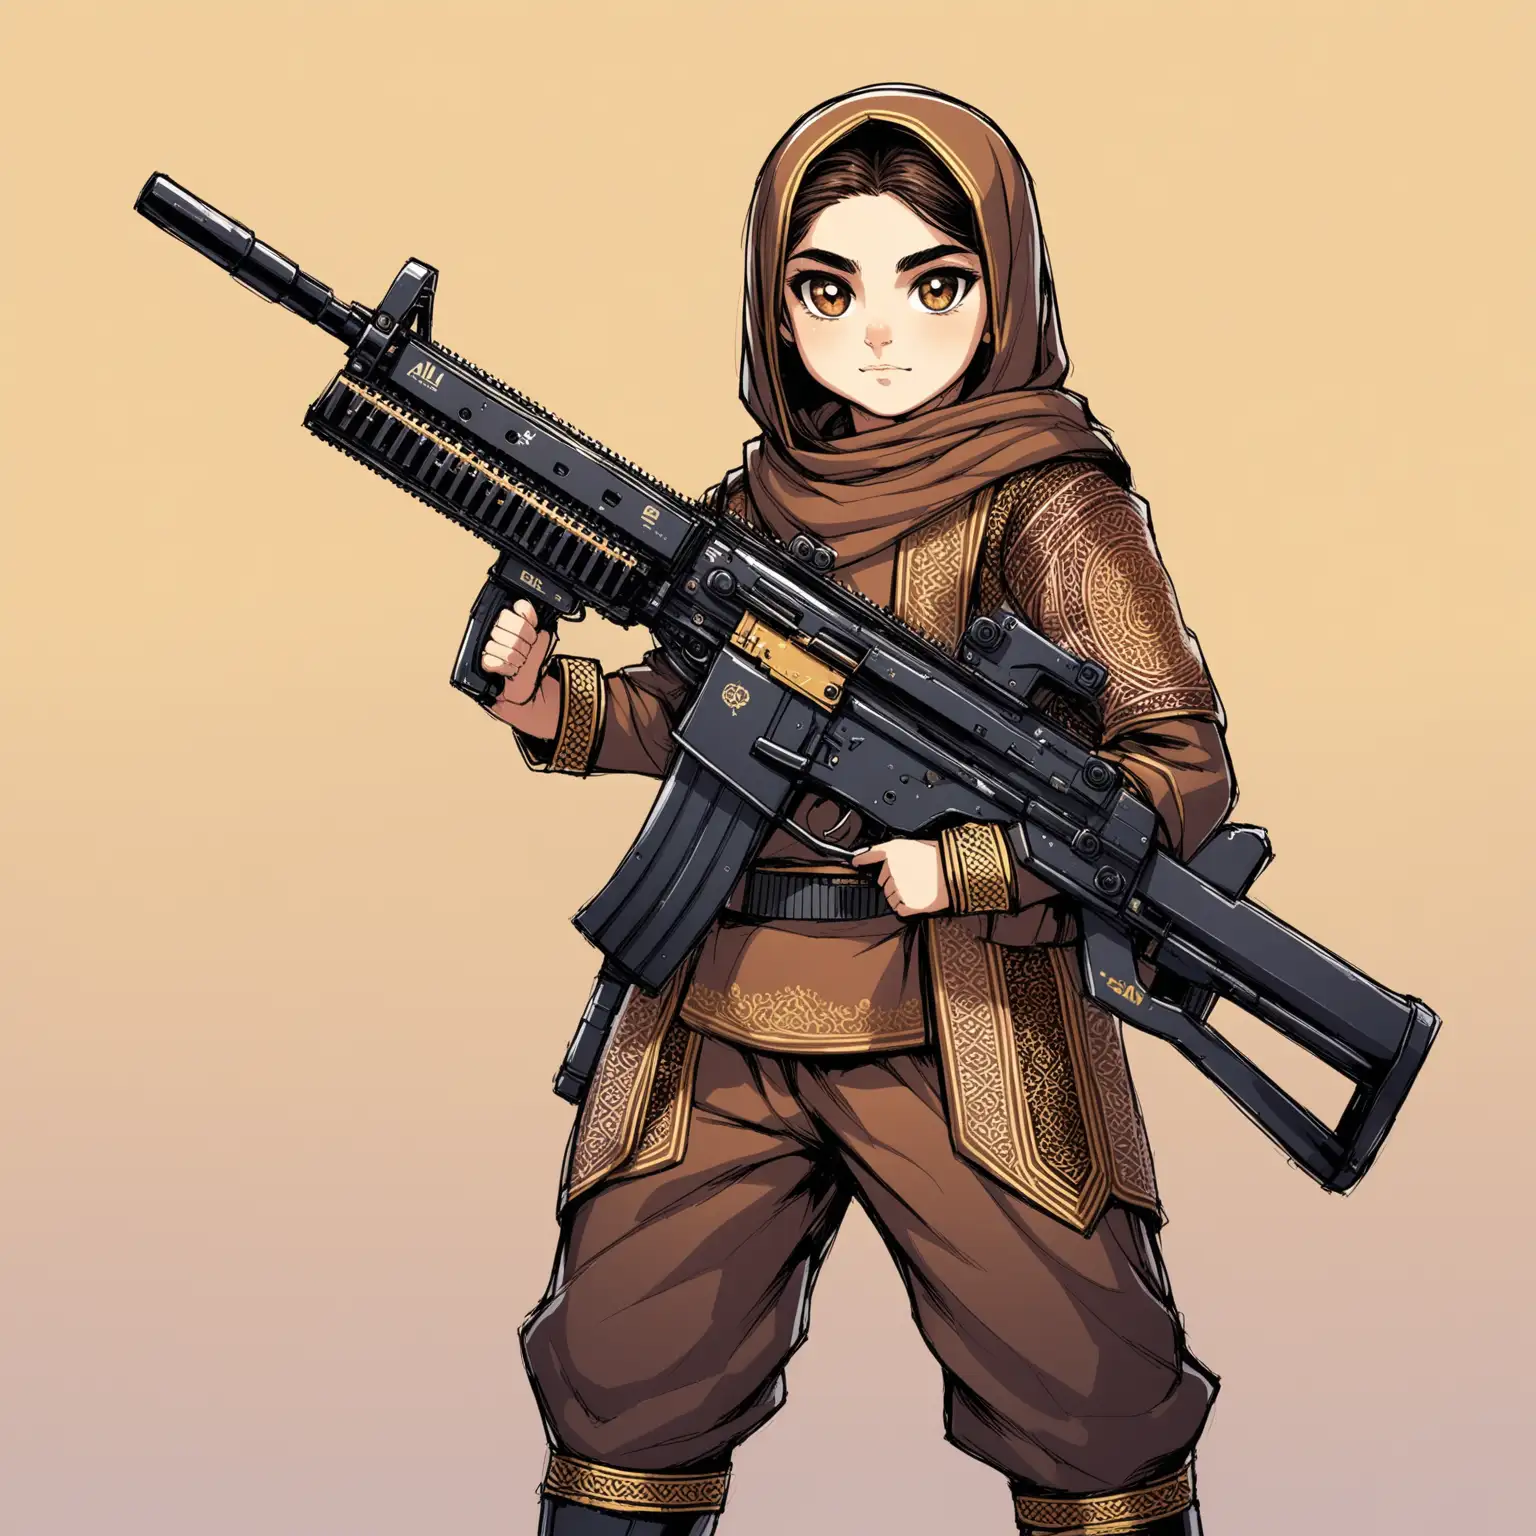 Defaults: Persian(face, language, design), 7 to 10 years old boys' favorite colors.

Atmosphere is IRIS Deylaman.

Ali is a Persian 10 years old warrior, super modern high-tech machine gun, clothes full of Persian designs, smaller eyes, bigger nose, white skin, brown eyes.